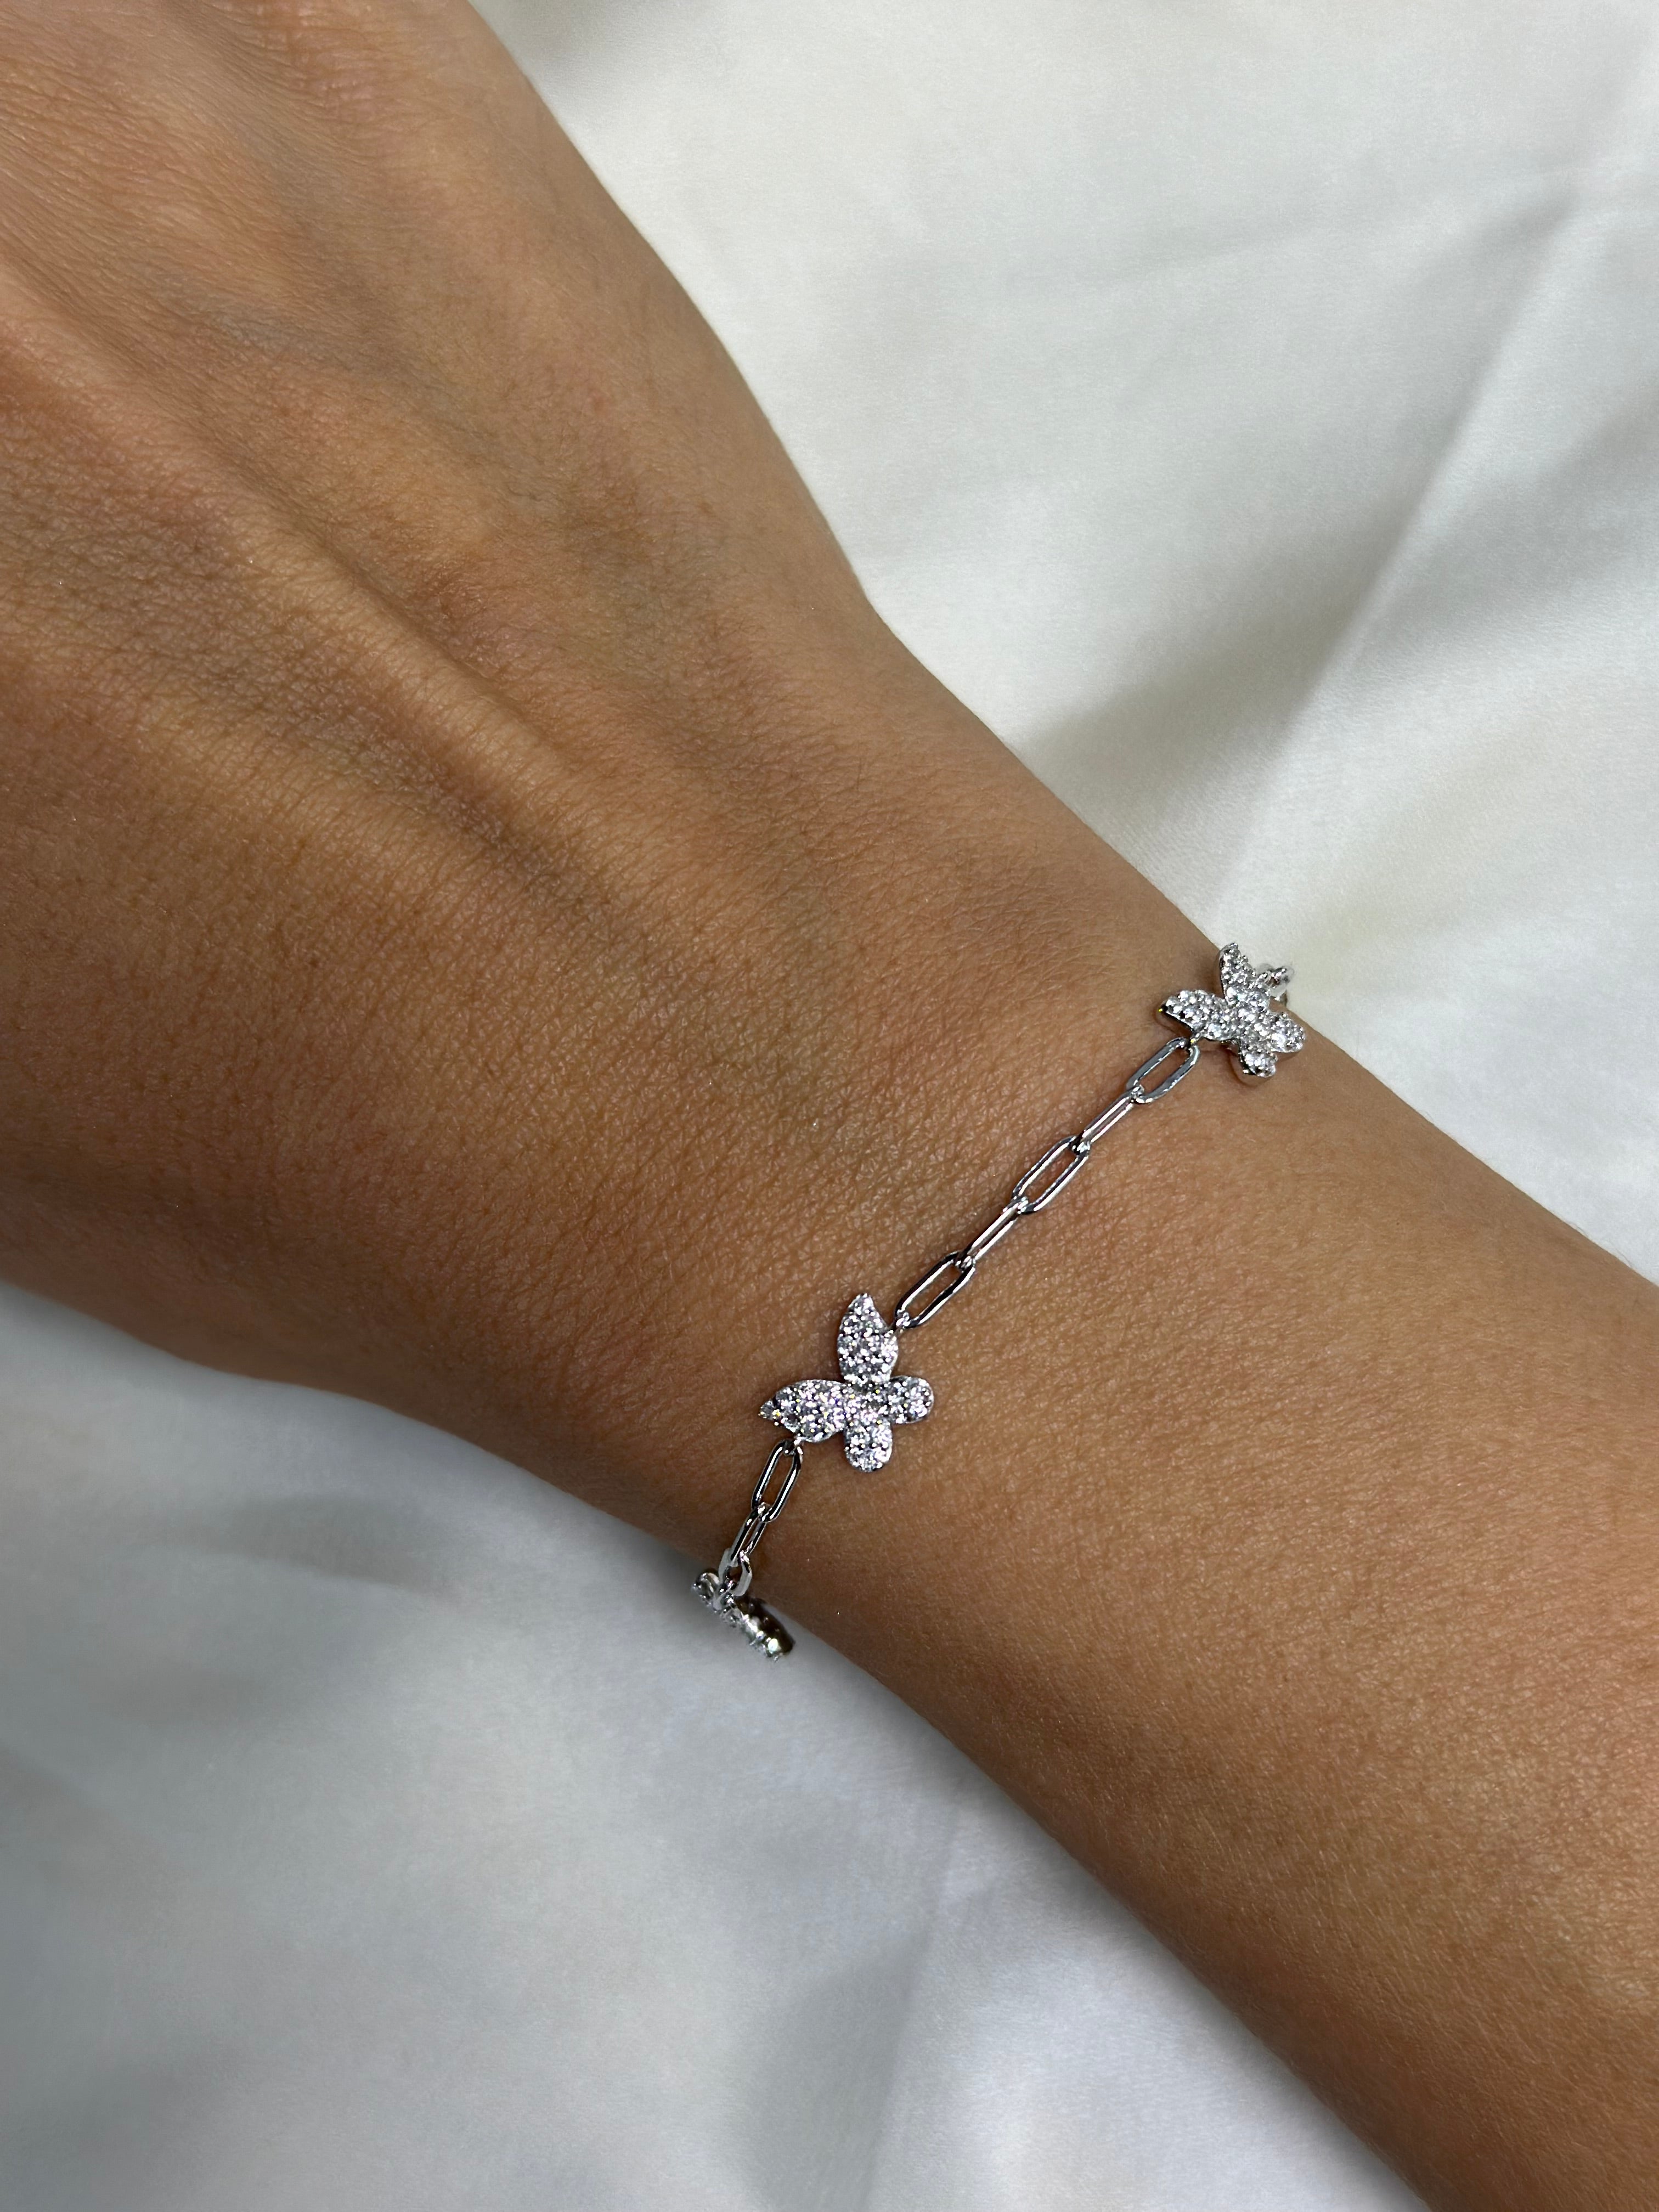 Butterfly bracelet decorated with zircons